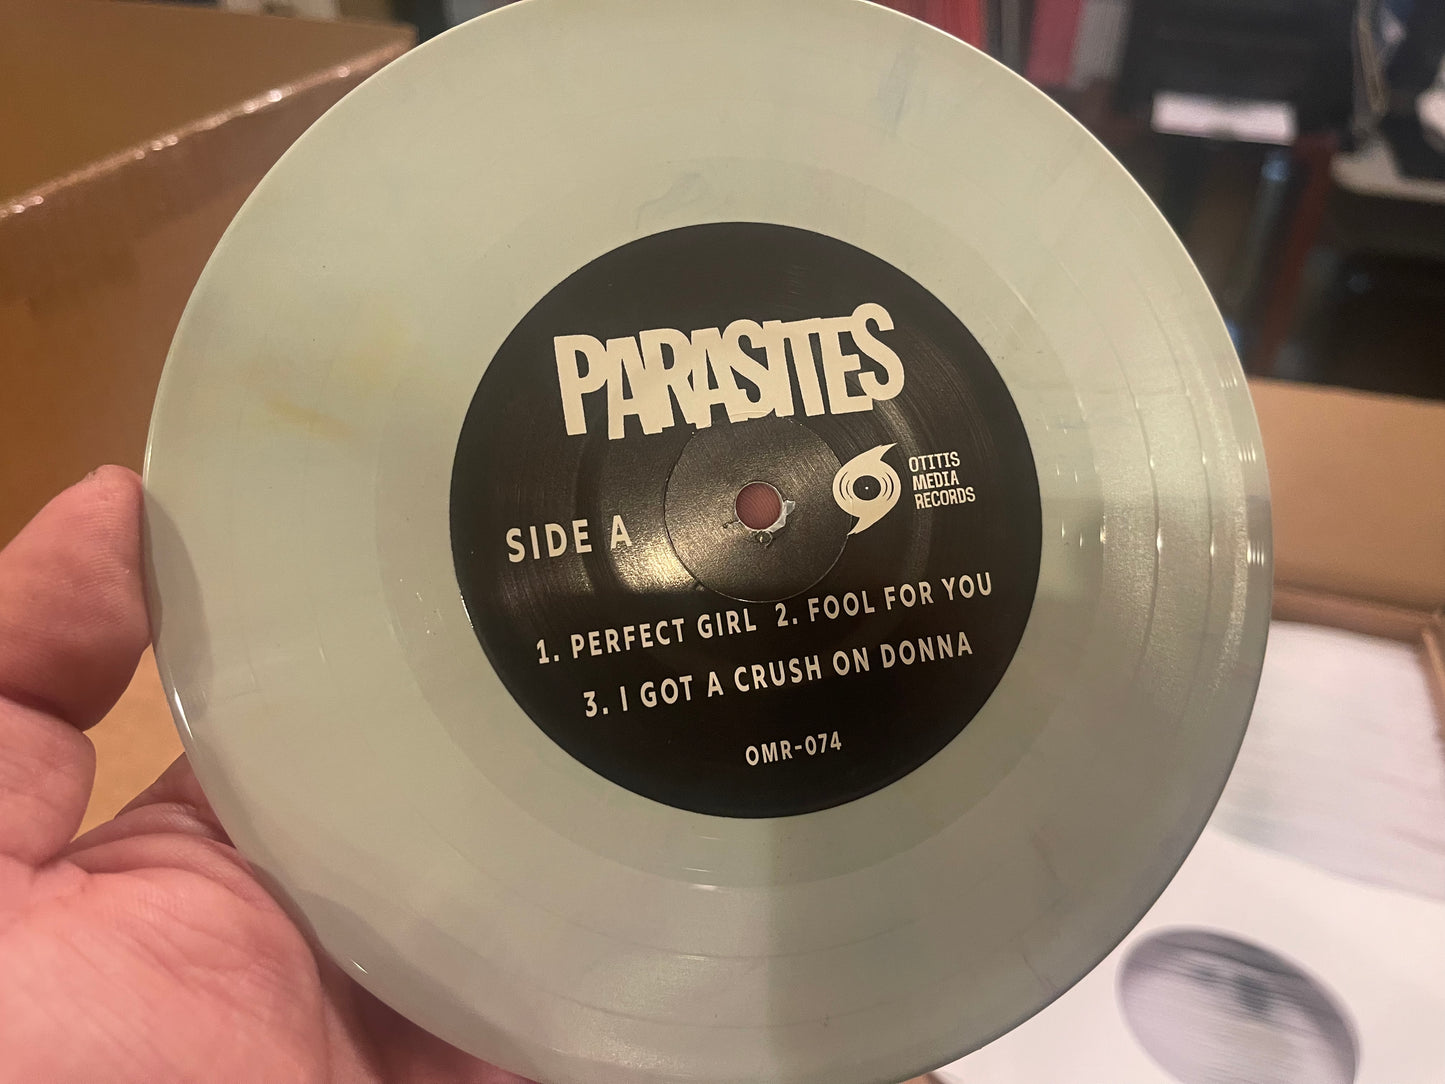 OMR-074 PARASITES “EP-onymous” 7 inch Vinyl (Colored)Pre-Order!!!